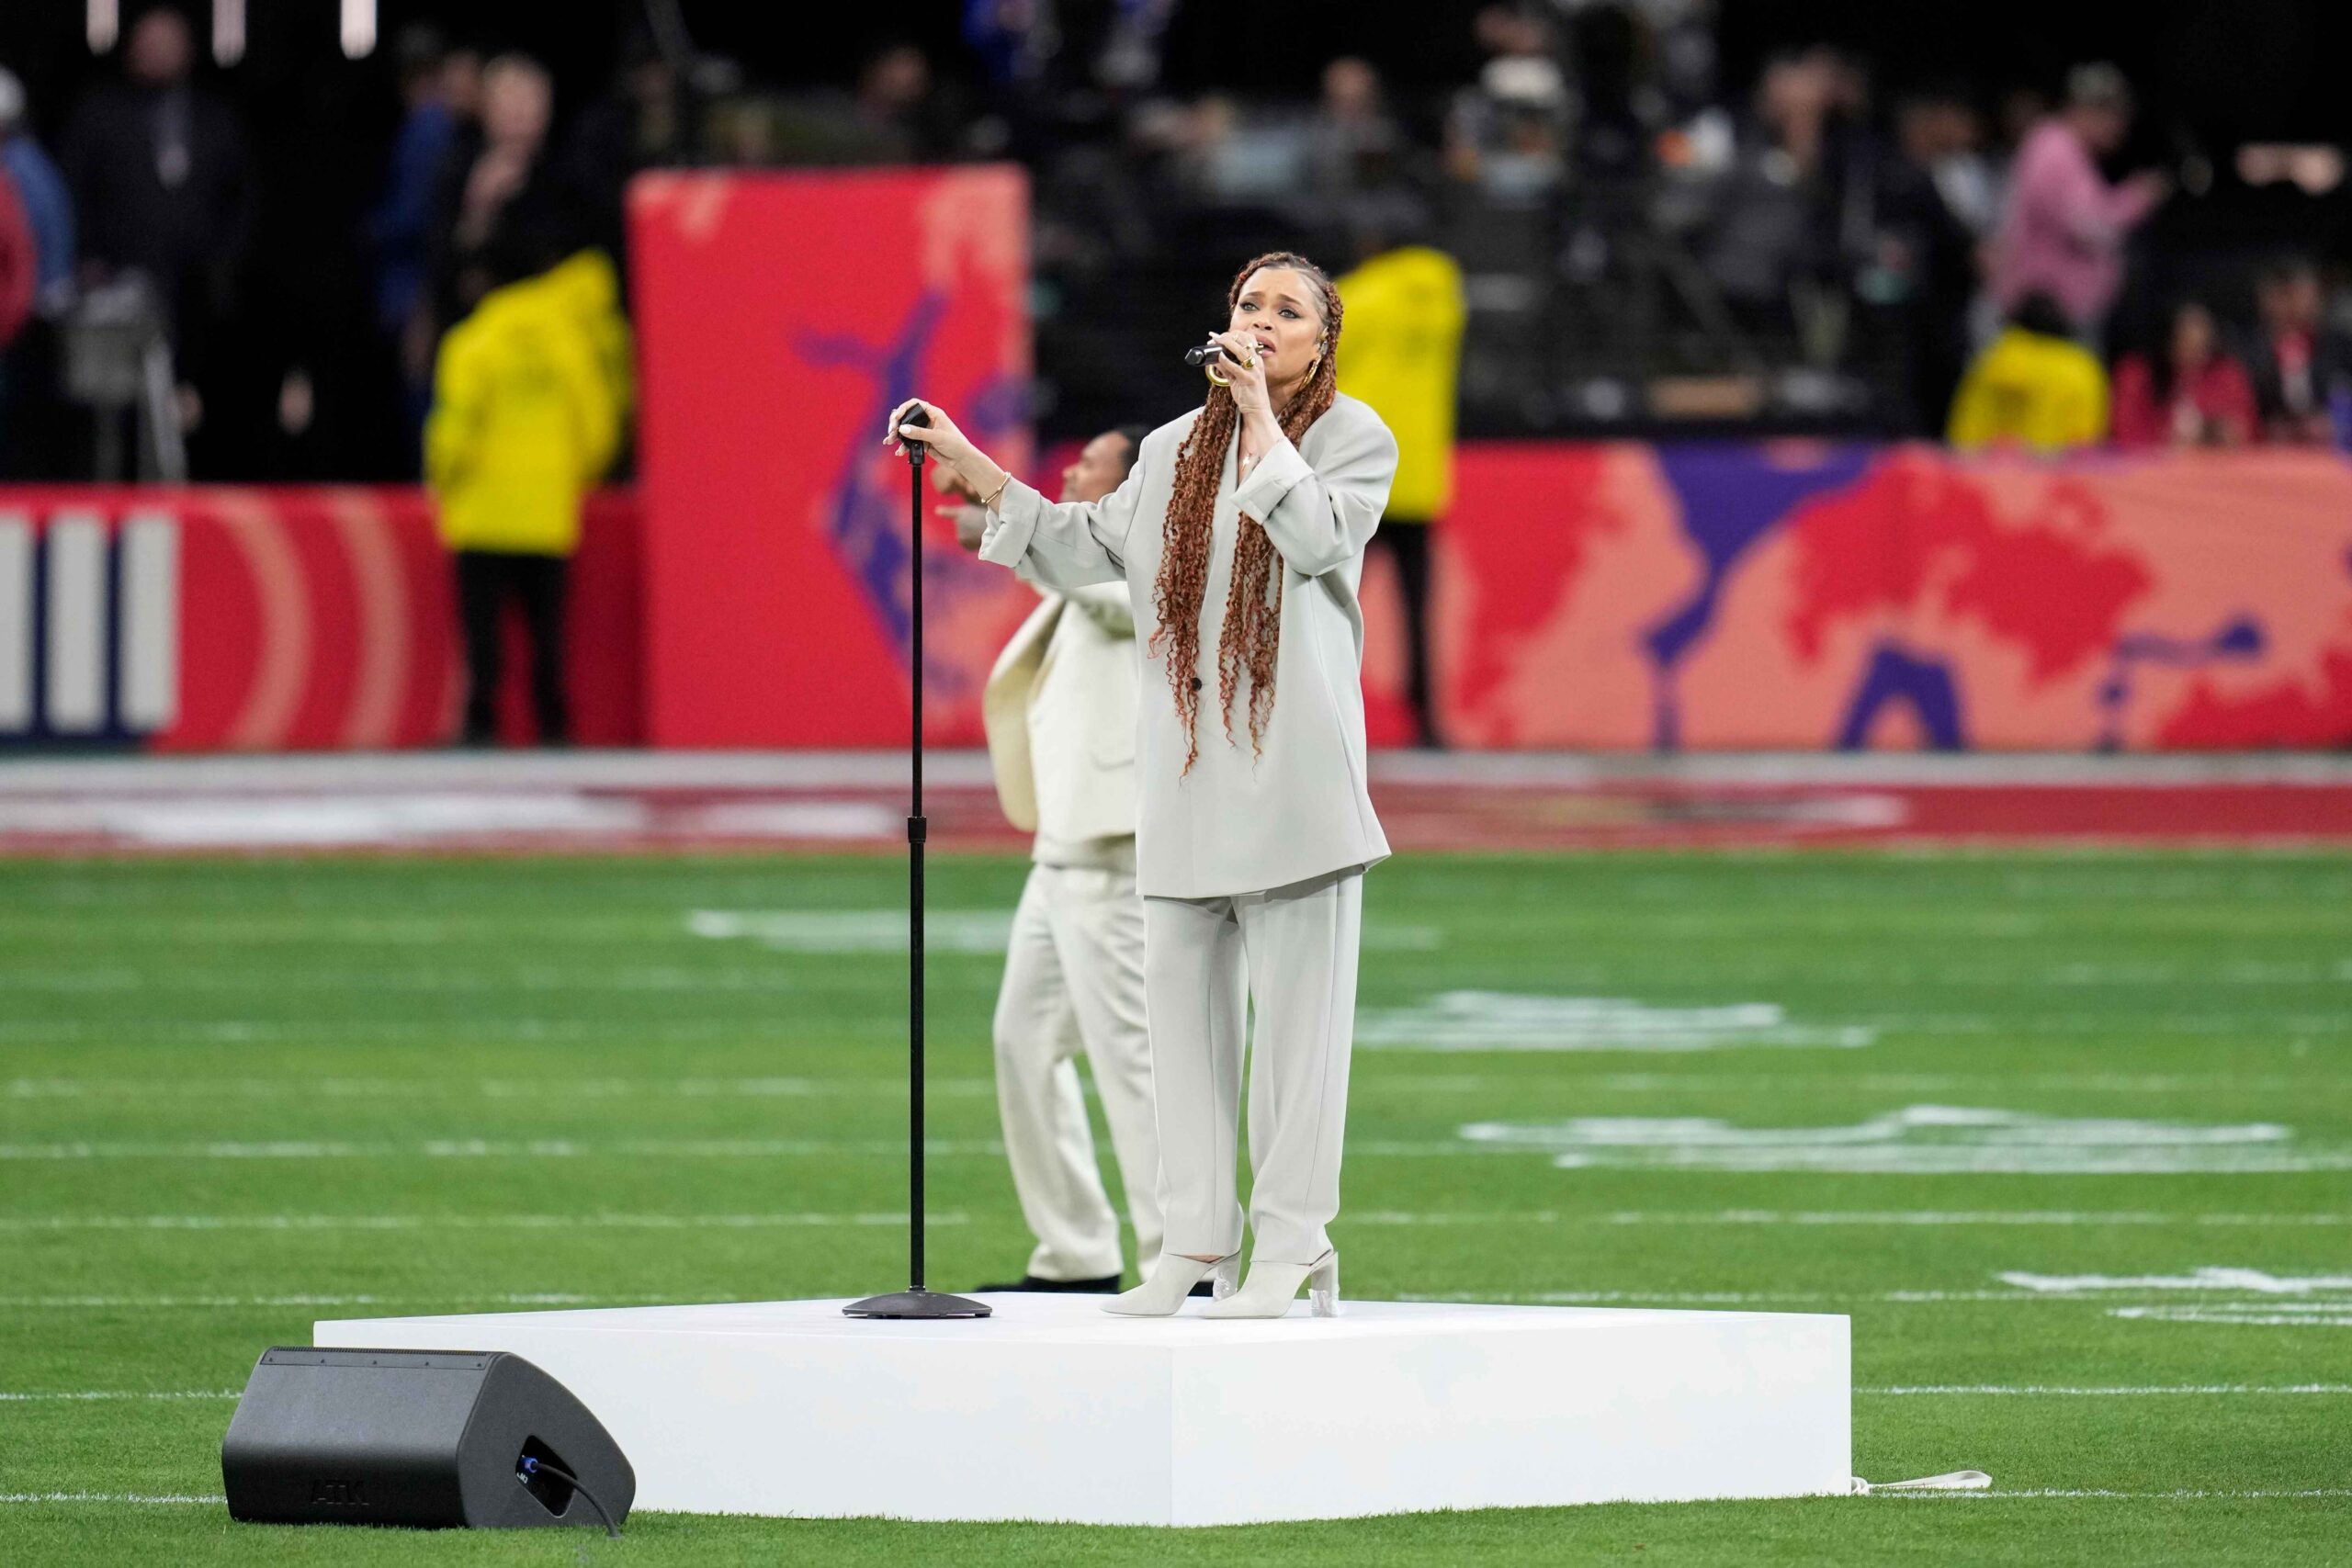 Super Bowl LVIII started with a performance of "the Black National Anthem," and the media celebrated it...but does an alternate anthem cause even more division?